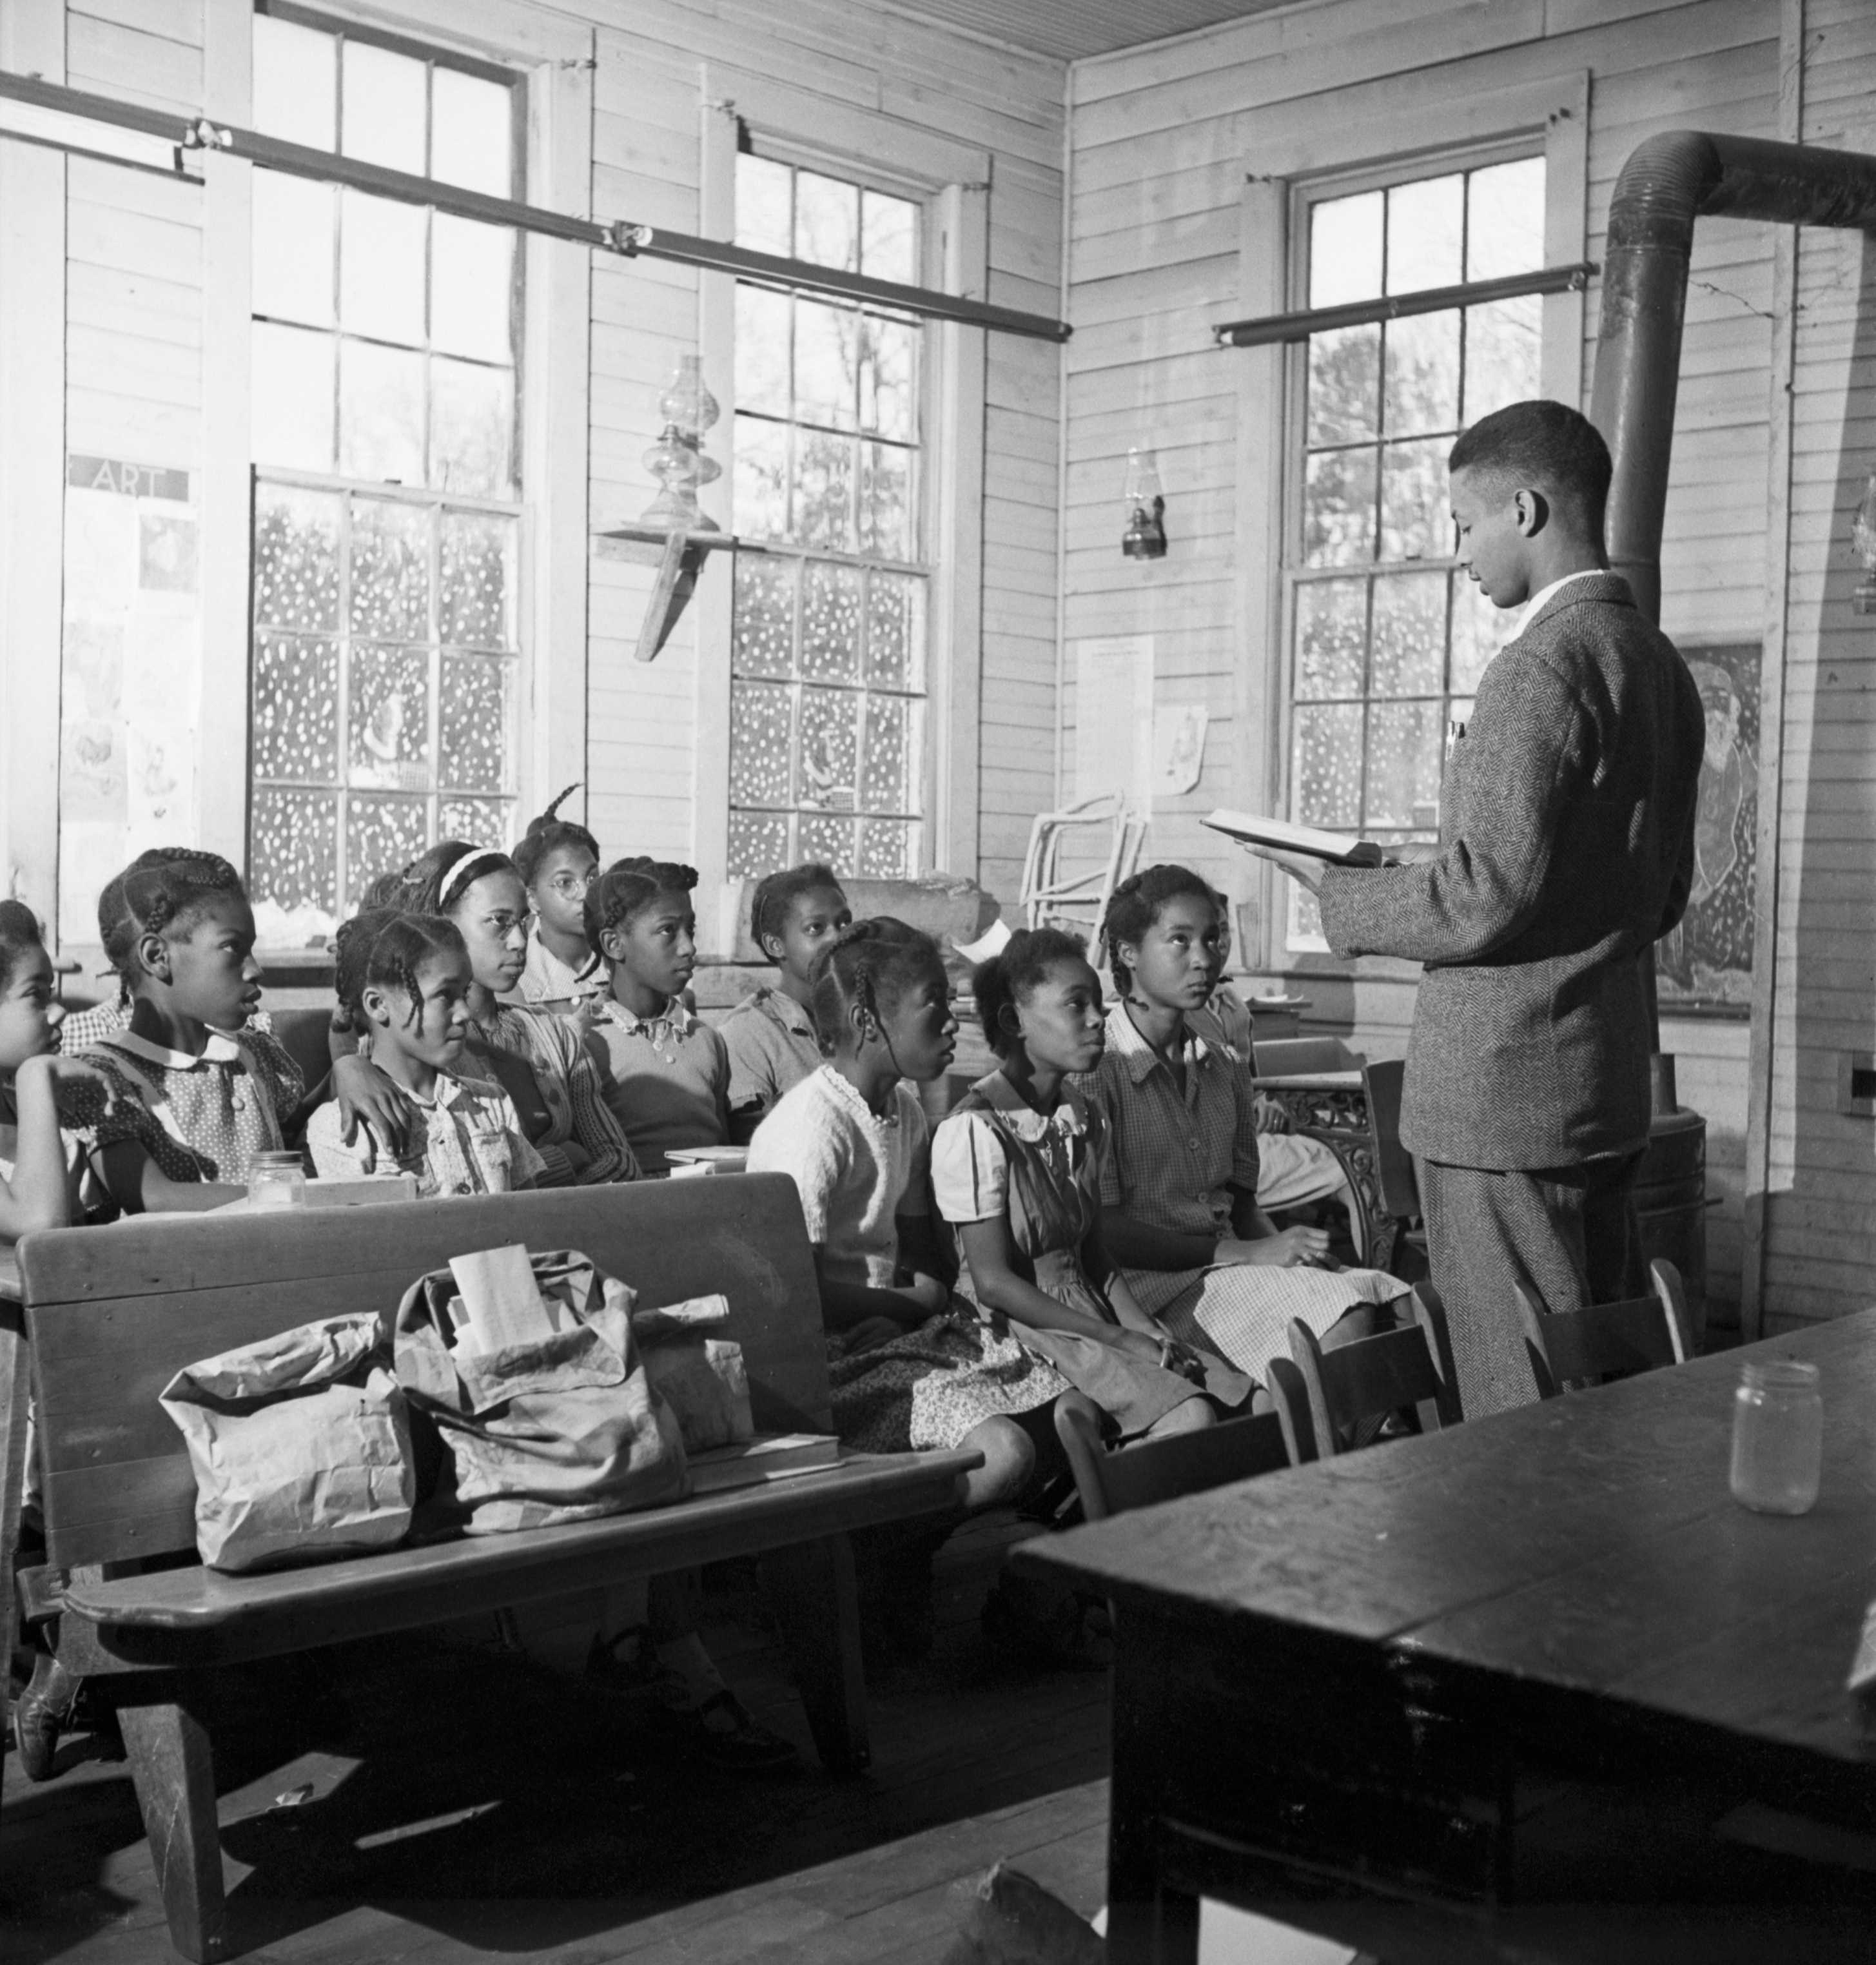 Black and white photograph of children seated in a classroom on benches.  There is also a male teacher reading to them from an open book.